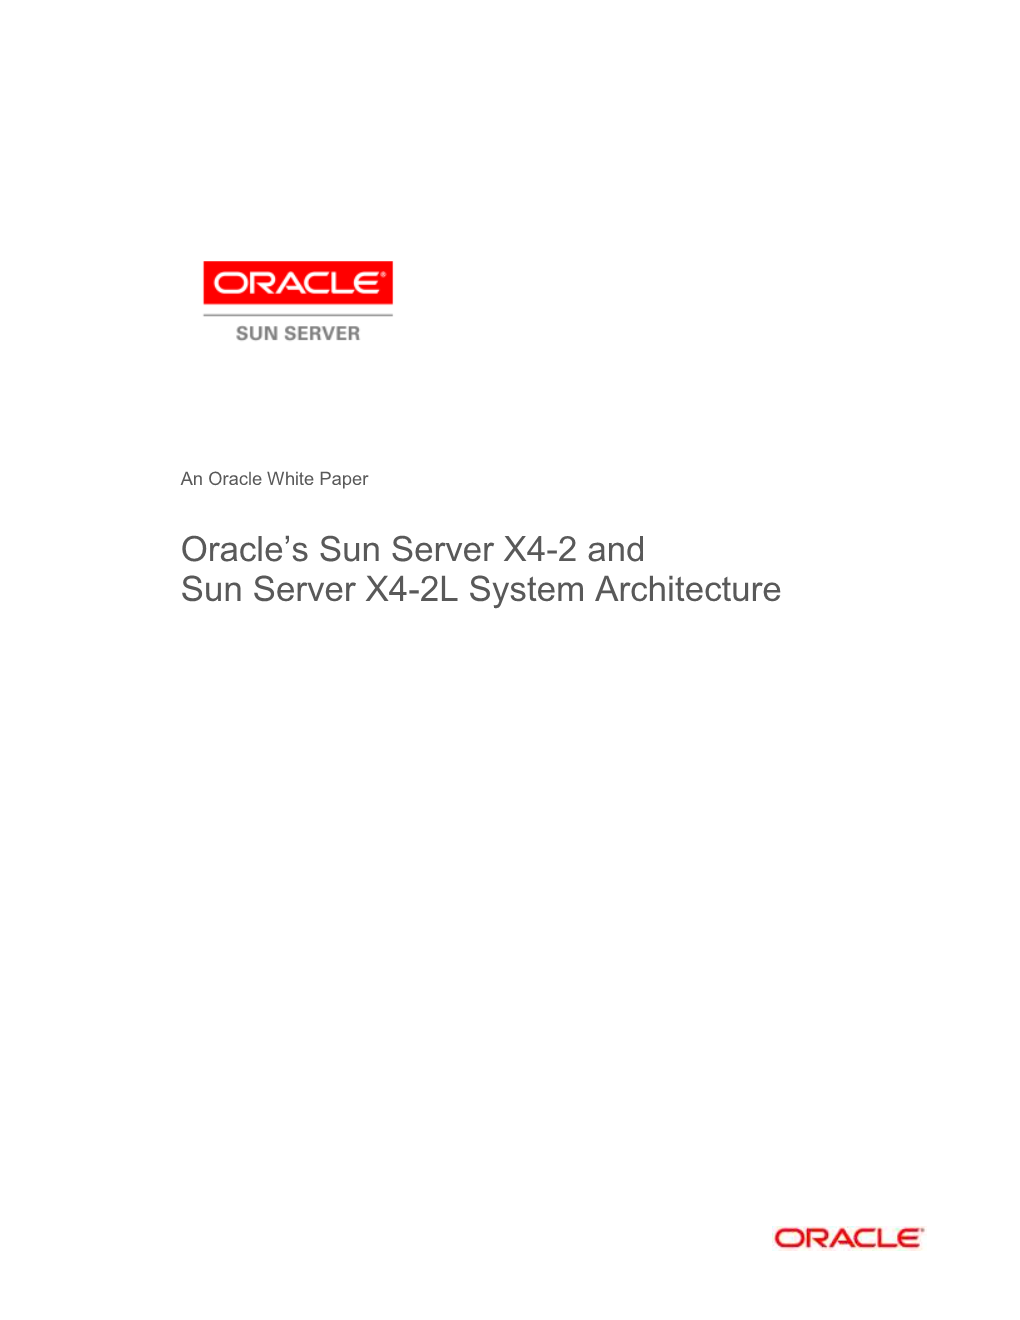 Oracle's Sun Server X4-2 and Sun Server X4-2L System Architecture